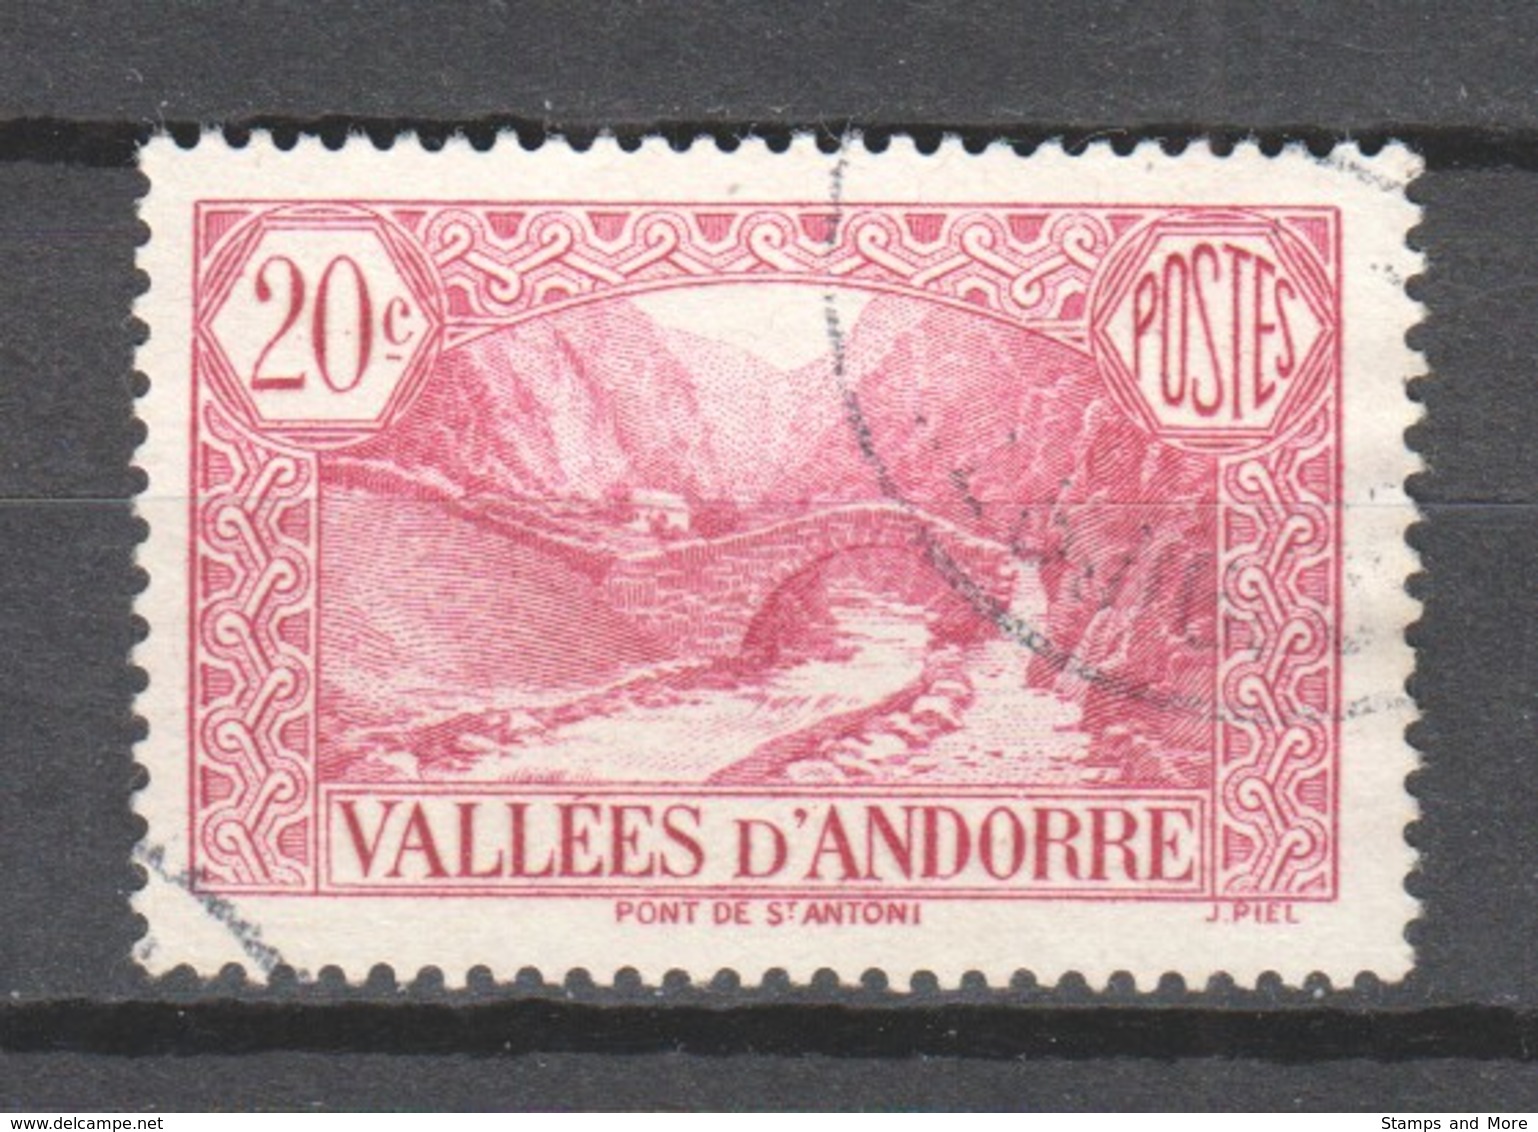 Andorra French 1932 Mi 30 Canceled - Used Stamps